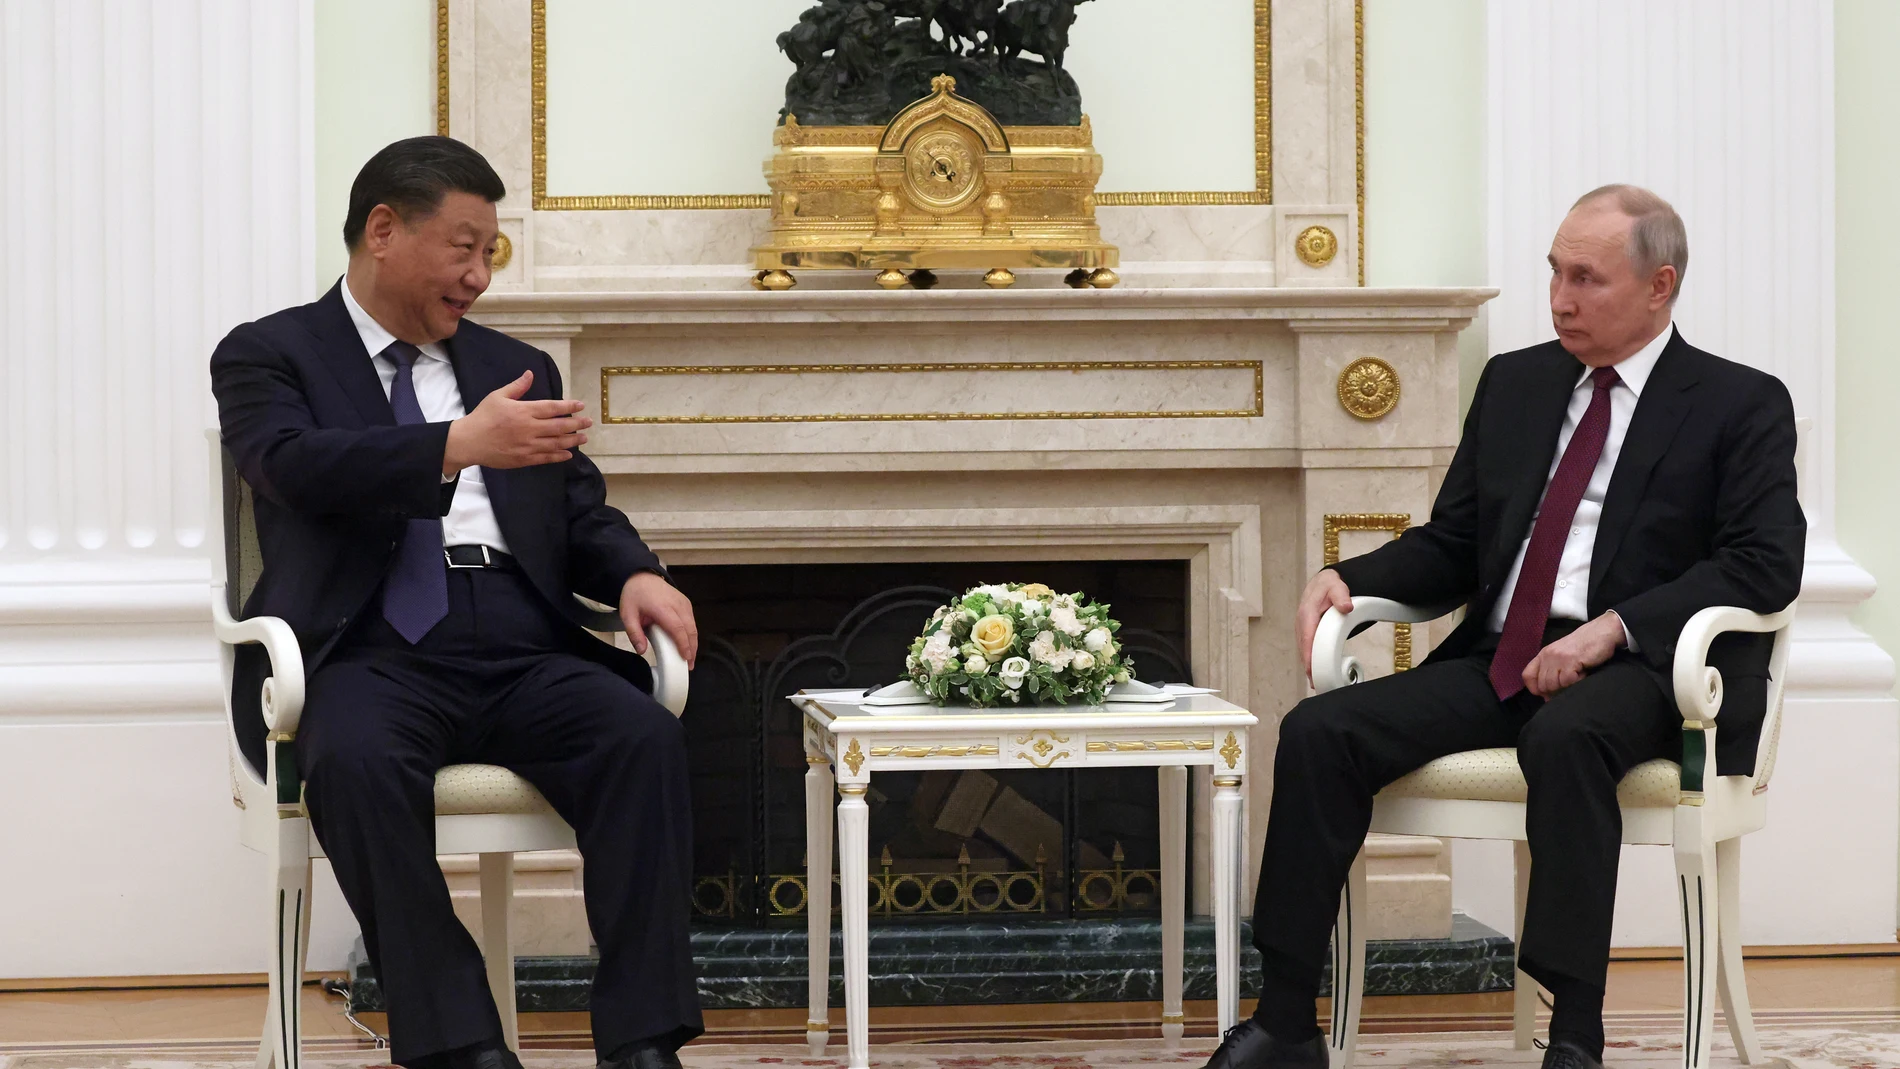 Moscow (Russian Federation), 19/03/2023.- Chinese President Xi Jinping (L) gestures while speaking with Russian President Vladimir Putin (R), during their meeting in Moscow Kremlin in Moscow, Russia, 20 March 2023. Chinese President Xi Jinping arrived in Moscow on a three-day visit, which will last from March 20 to 22, according to Russian and Chinese state agencies. Xi Jinping visits Russia on improving joint partnership and developing key areas of Russian-Chinese economic cooperation. (Rusia, Moscú) EFE/EPA/SERGEI KARPUHIN / SPUTNIK / KREMLIN POOL MANDATORY CREDIT 